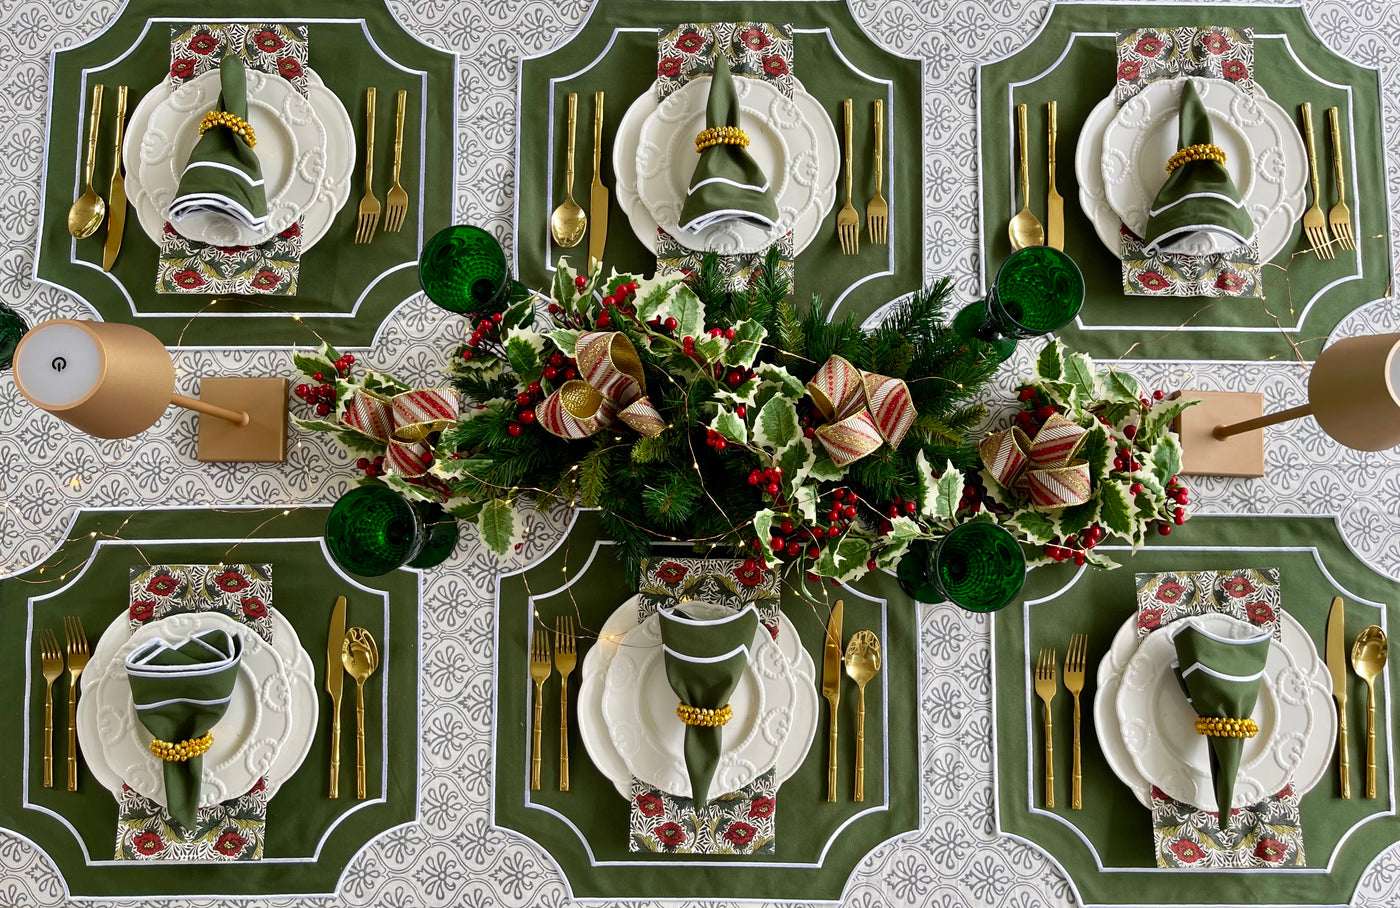 'High Tea' Placemat and Napkin Set - Forest Green